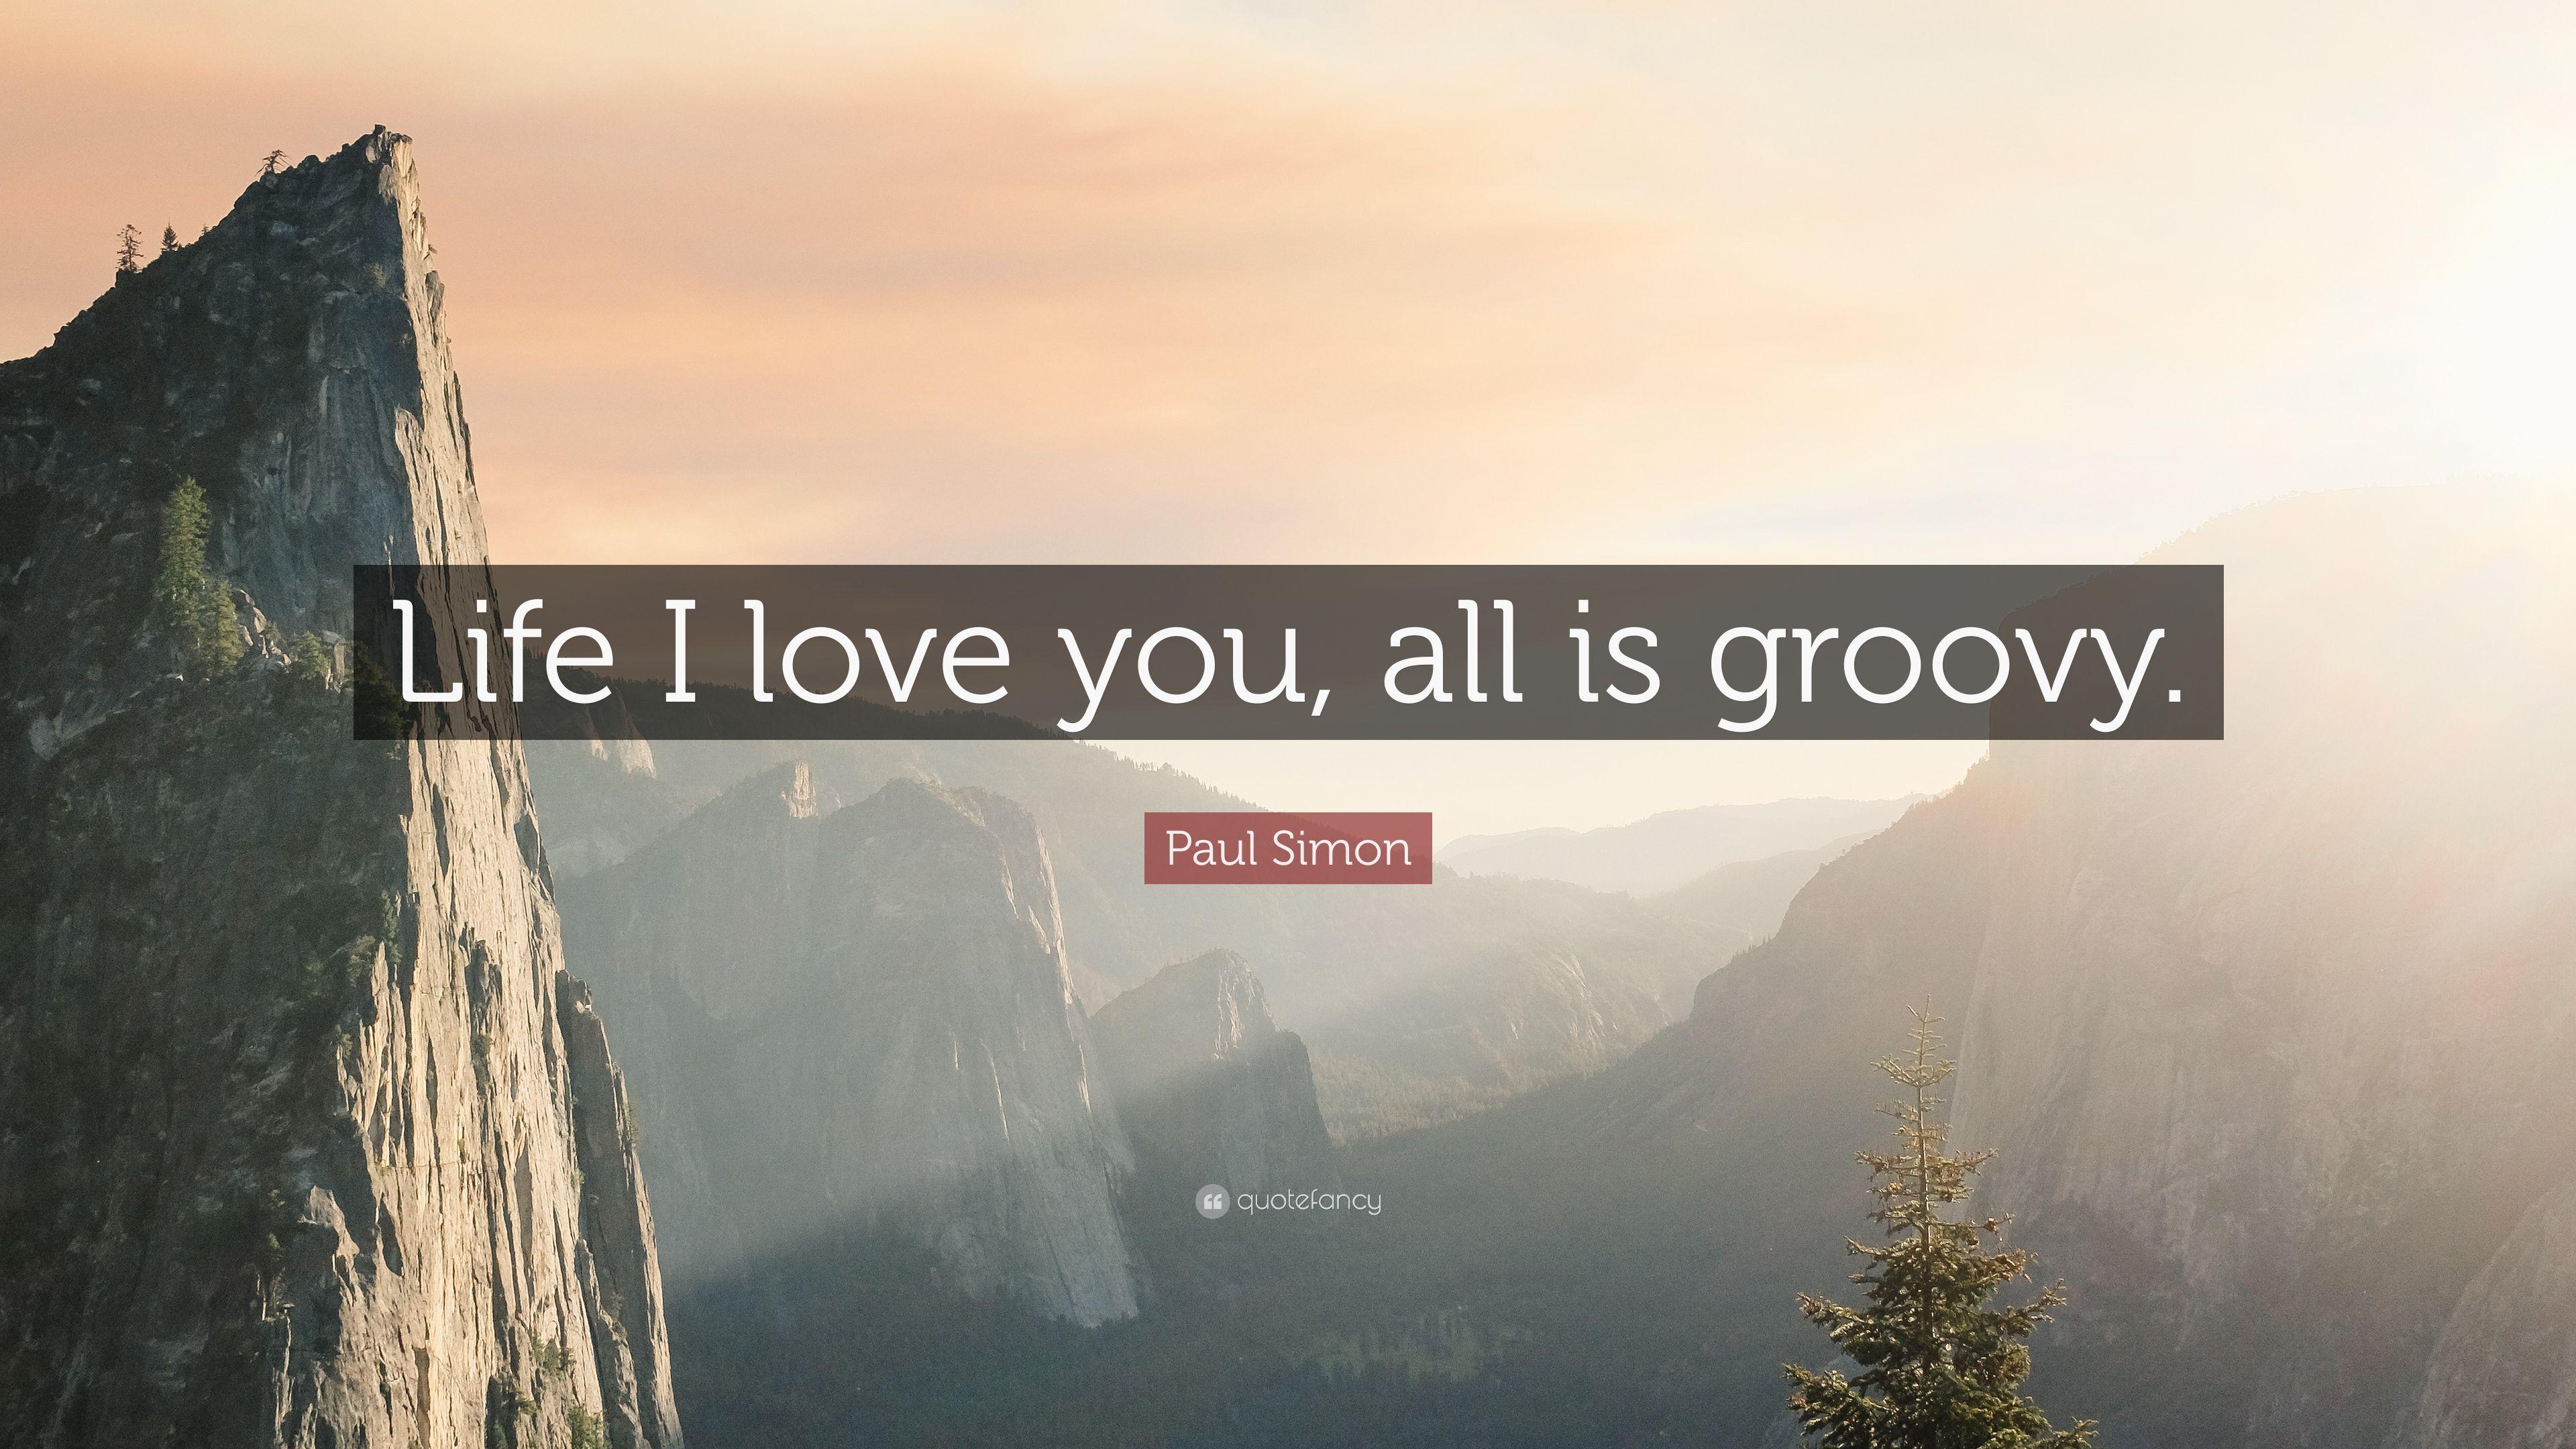 Paul Simon Quote: "Life I love you, all is groovy. 